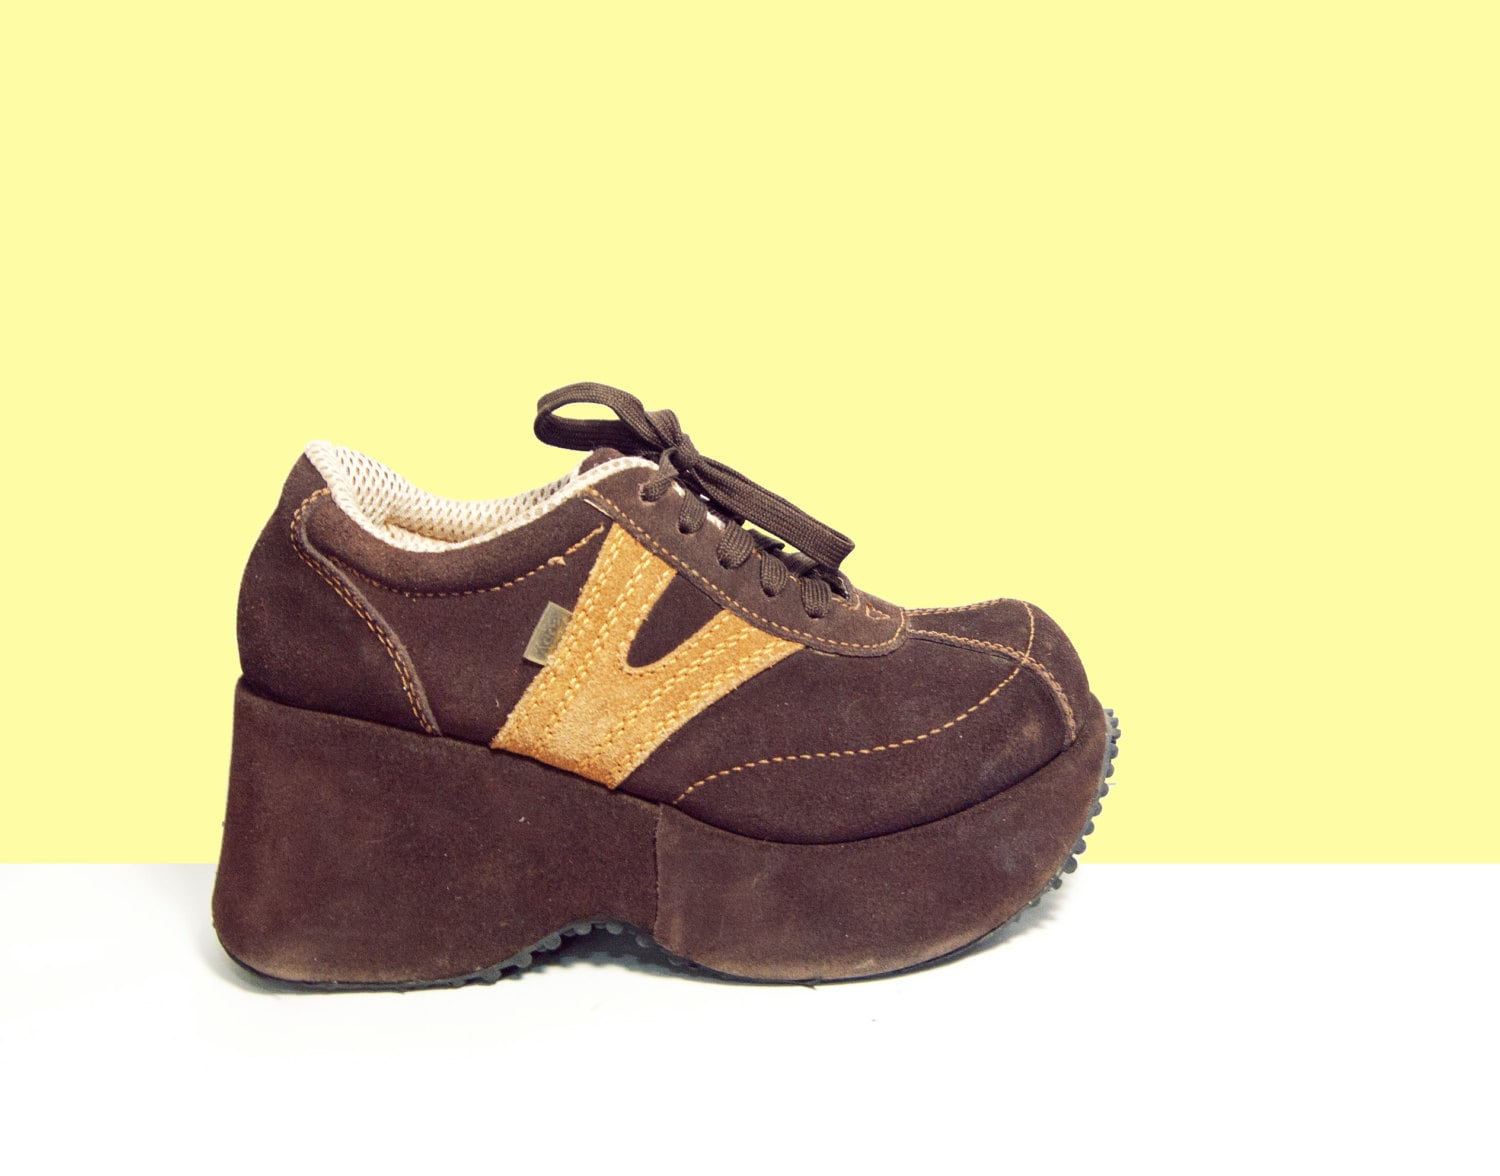 90s Brown Platform Sneakers / Trainers / Tennis Shoes / by